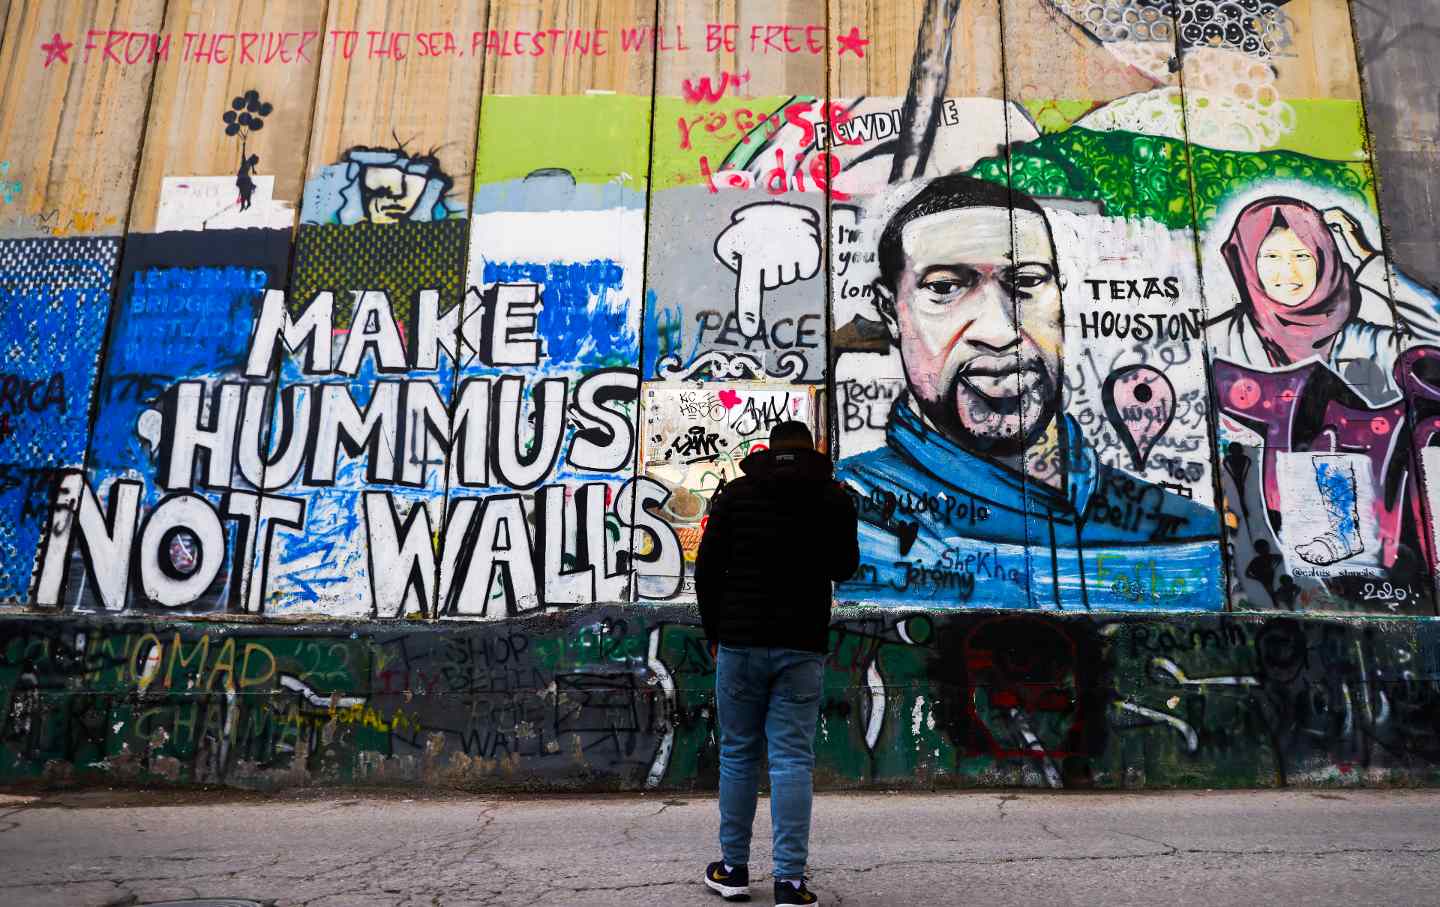 A person in jeans and a black sweatshirt looks at a brightly-colored mural depicting George Floyd as well as a sign reading "Make Hummus Not Walls."